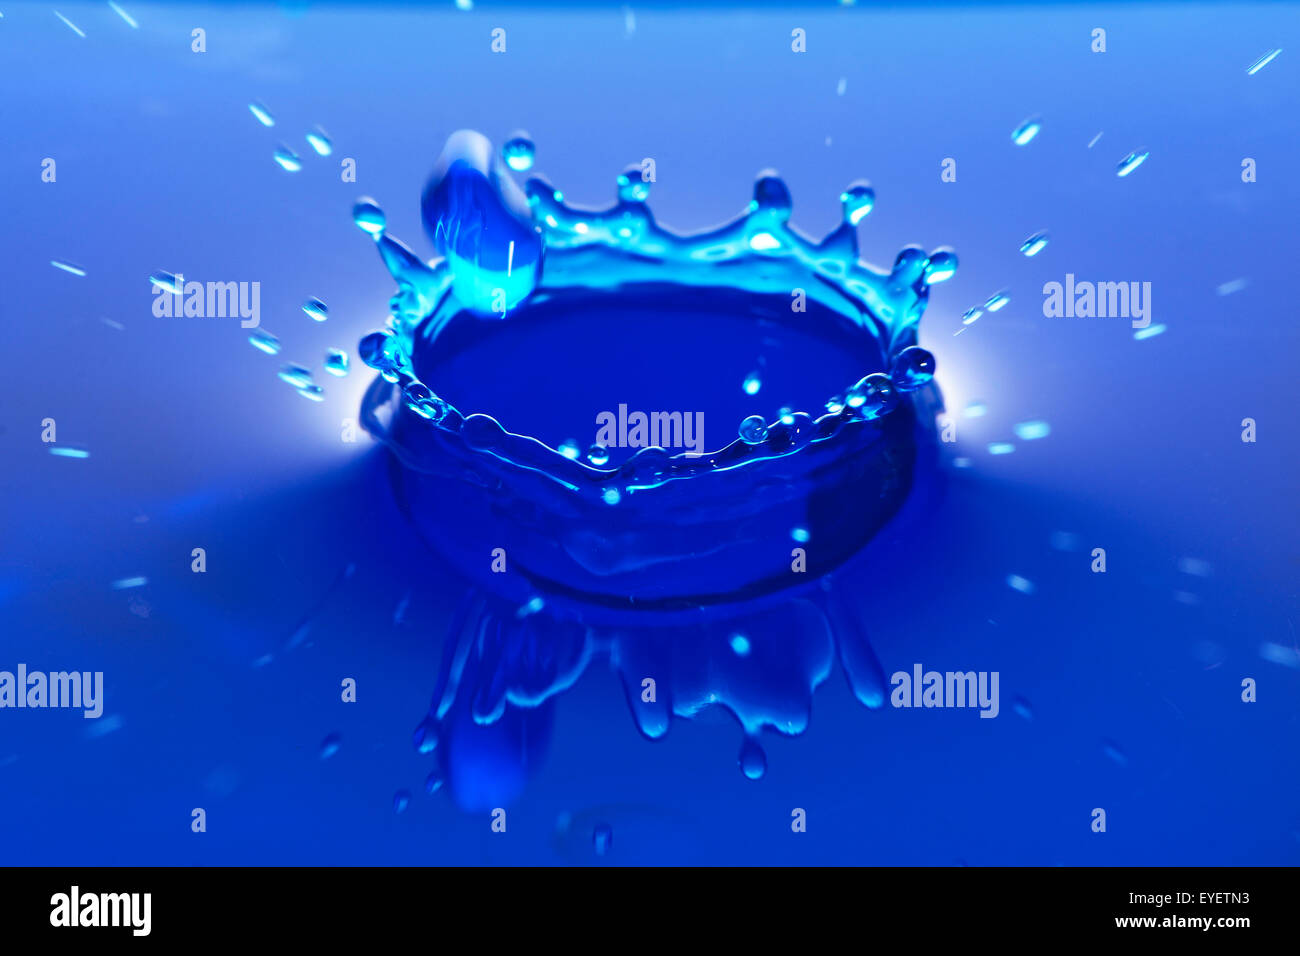 Colorful blue water droplet, fresh background abstract Stock Photo